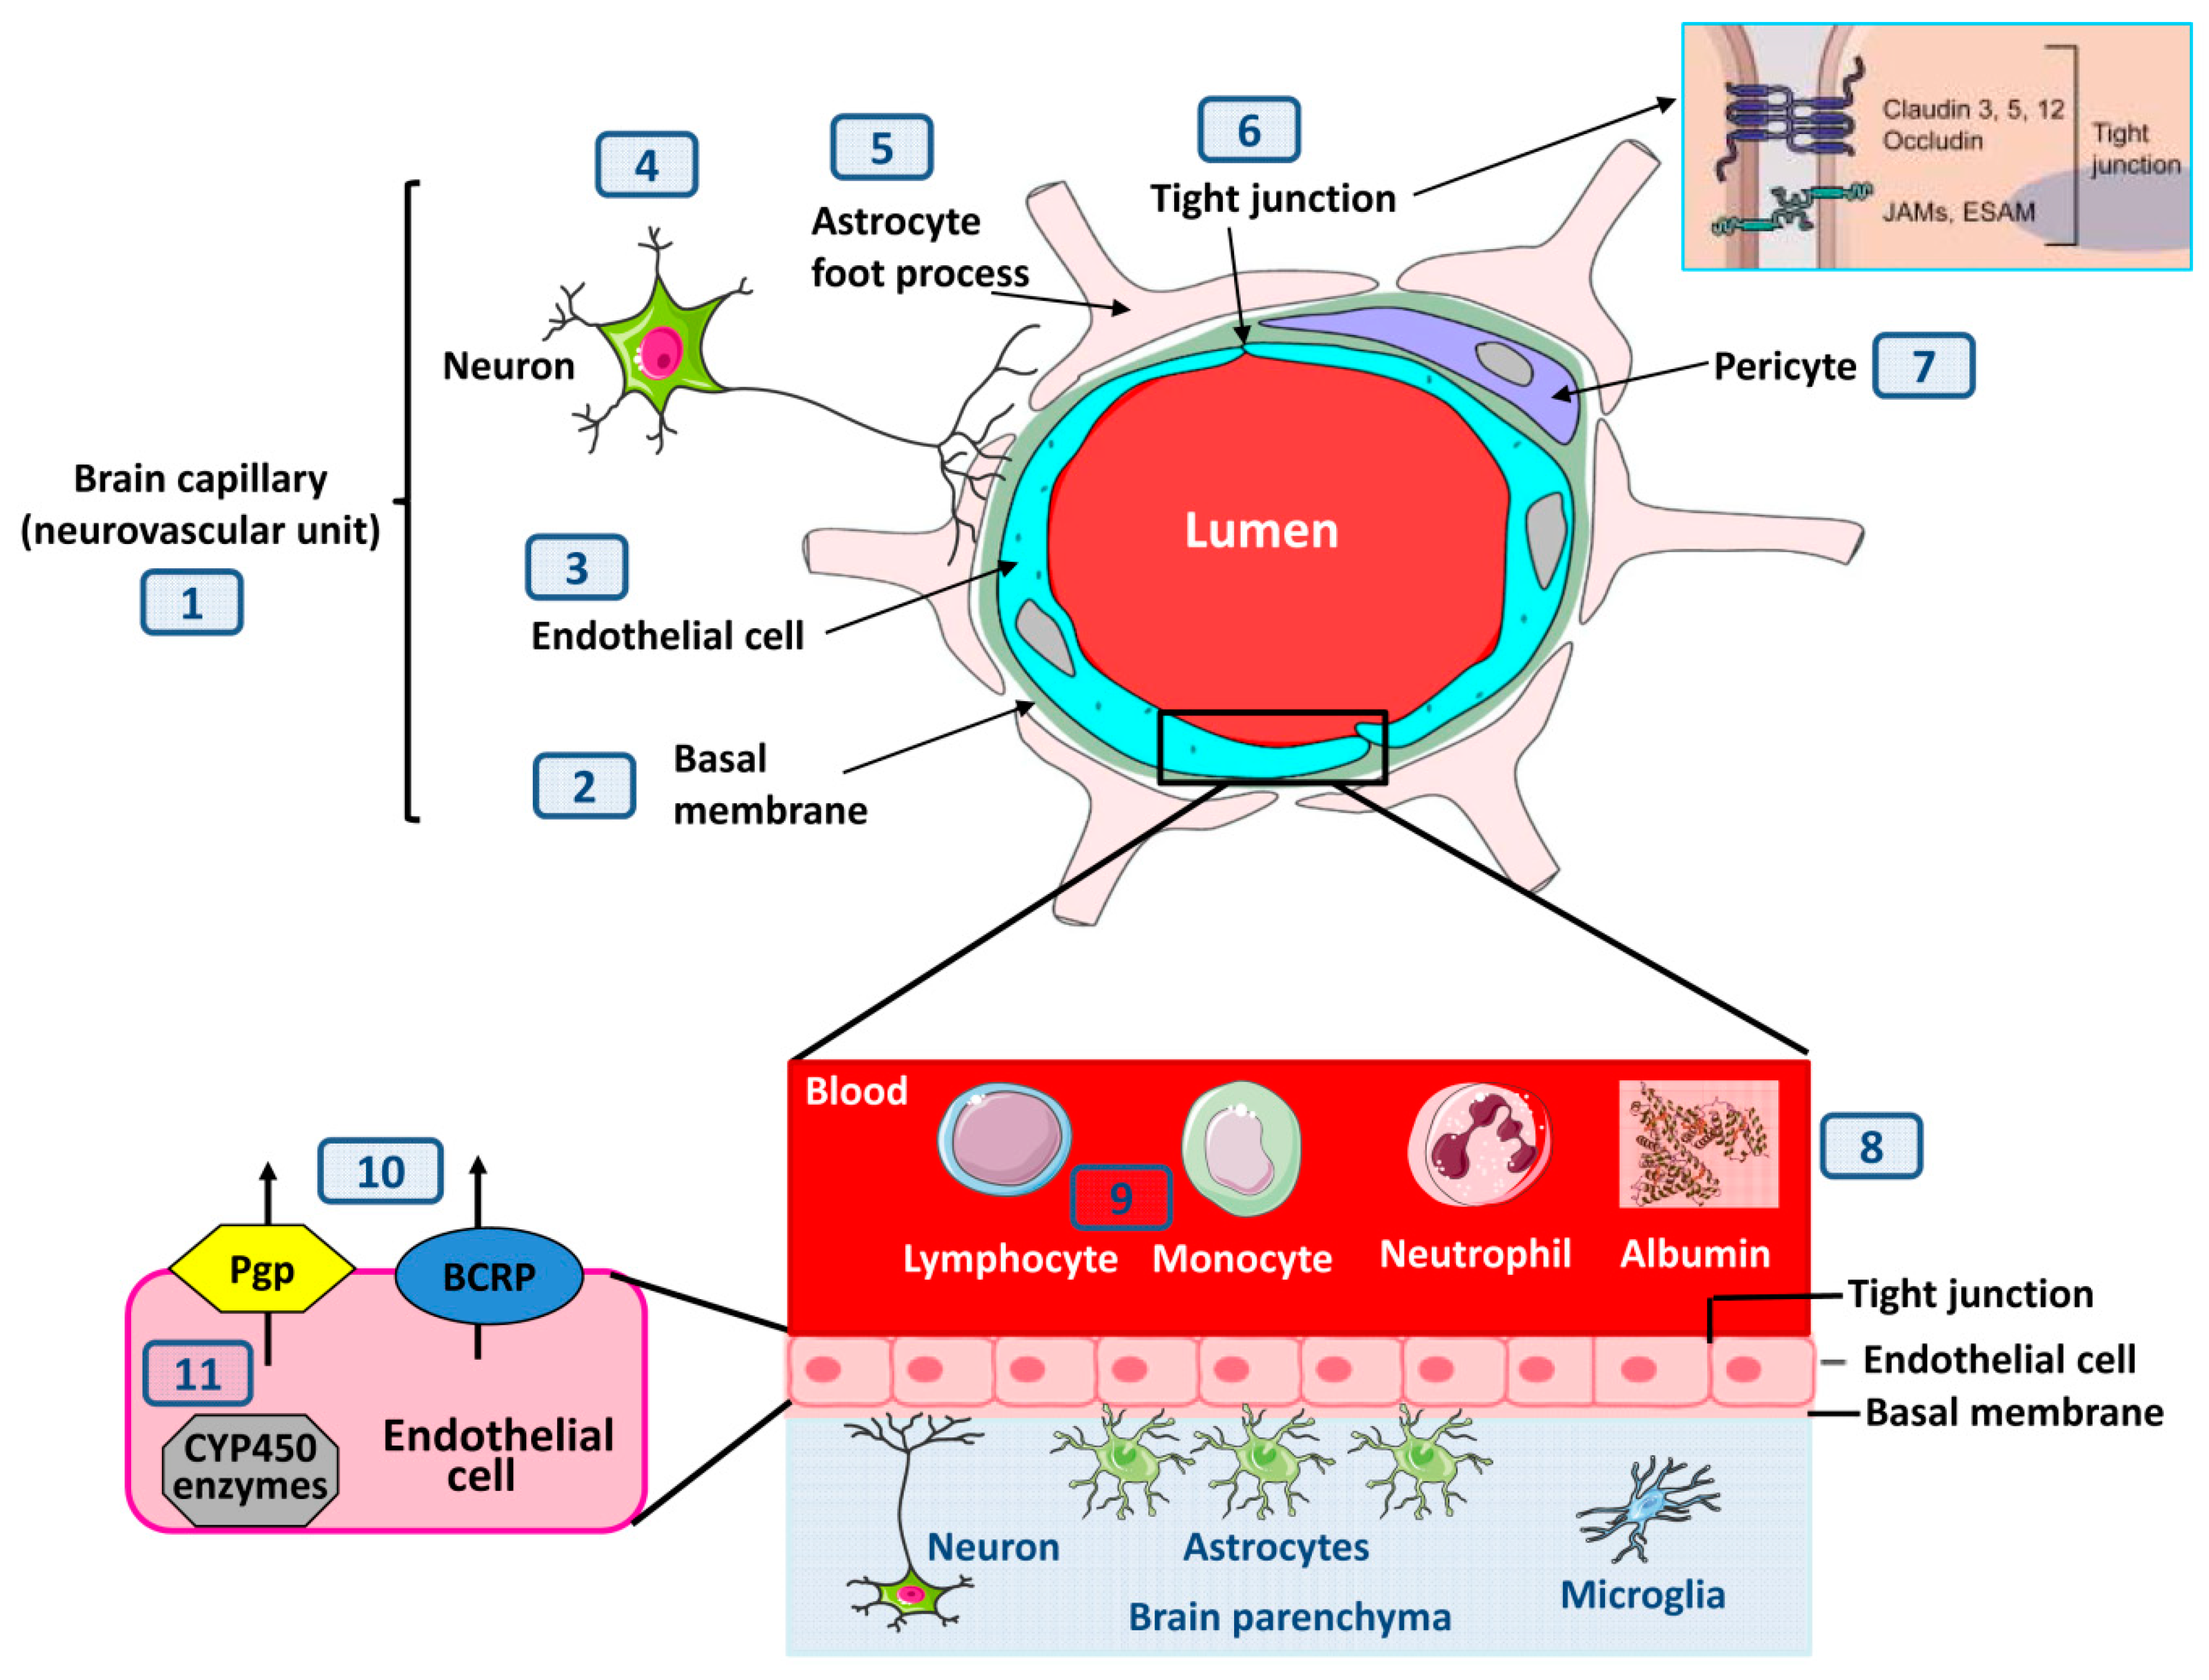 IJMS | Free Full-Text | Structural, Molecular, and Functional Alterations  of the Blood-Brain Barrier during Epileptogenesis and Epilepsy: A Cause,  Consequence, or Both?